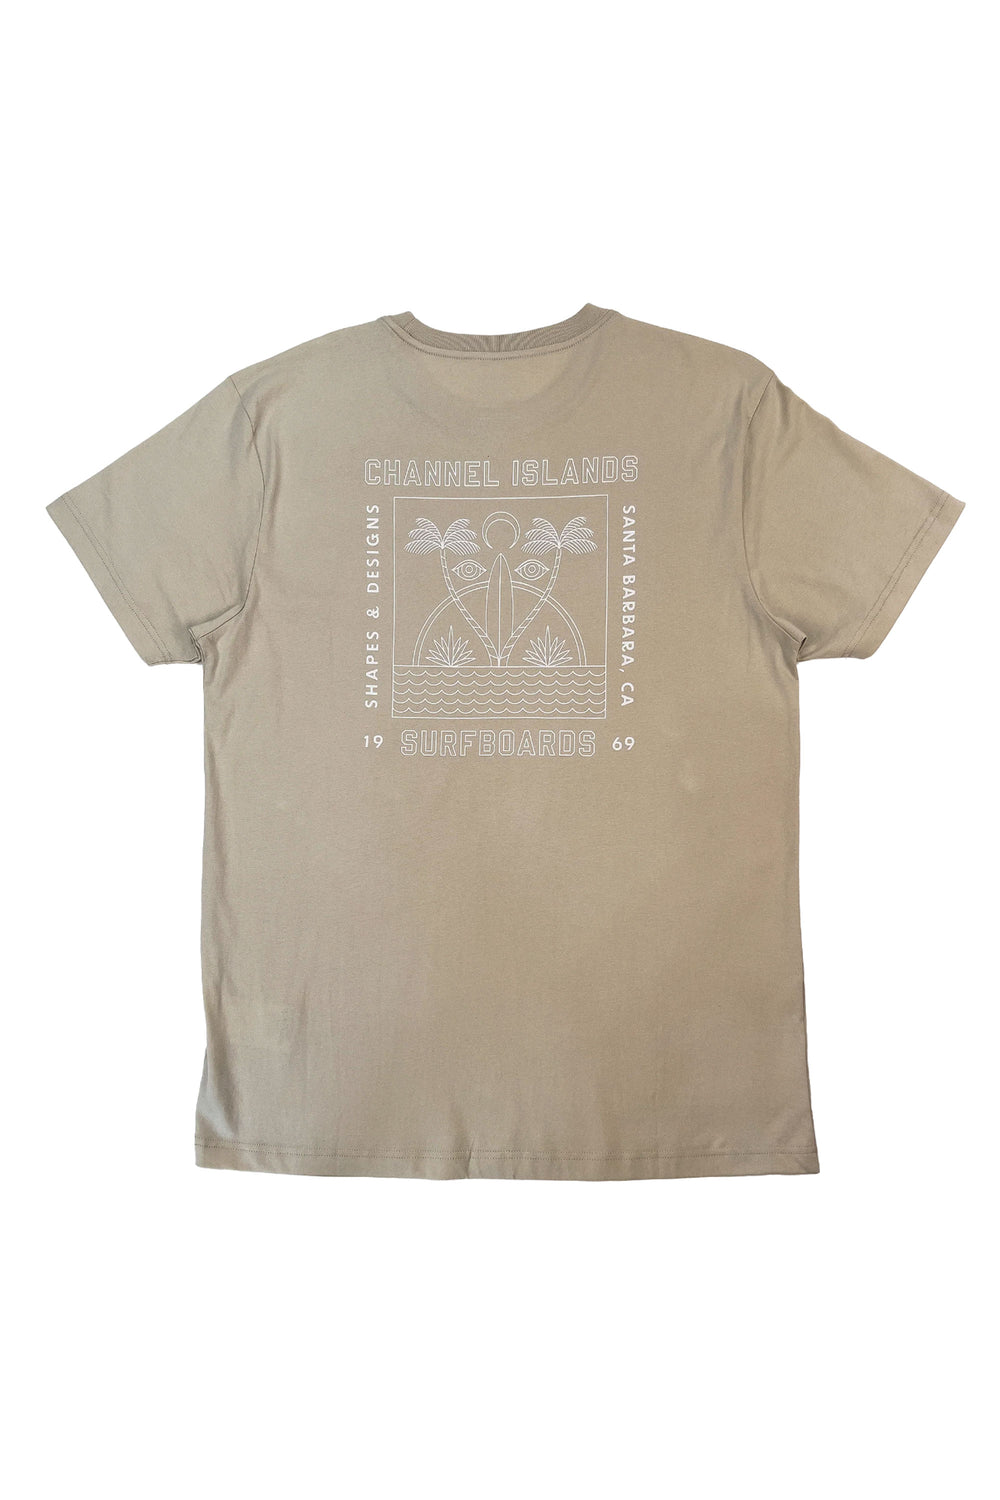 Pukas-Surf-Shop-channel-islands-clothing-eyes-short-sleeve-tshirt-cement